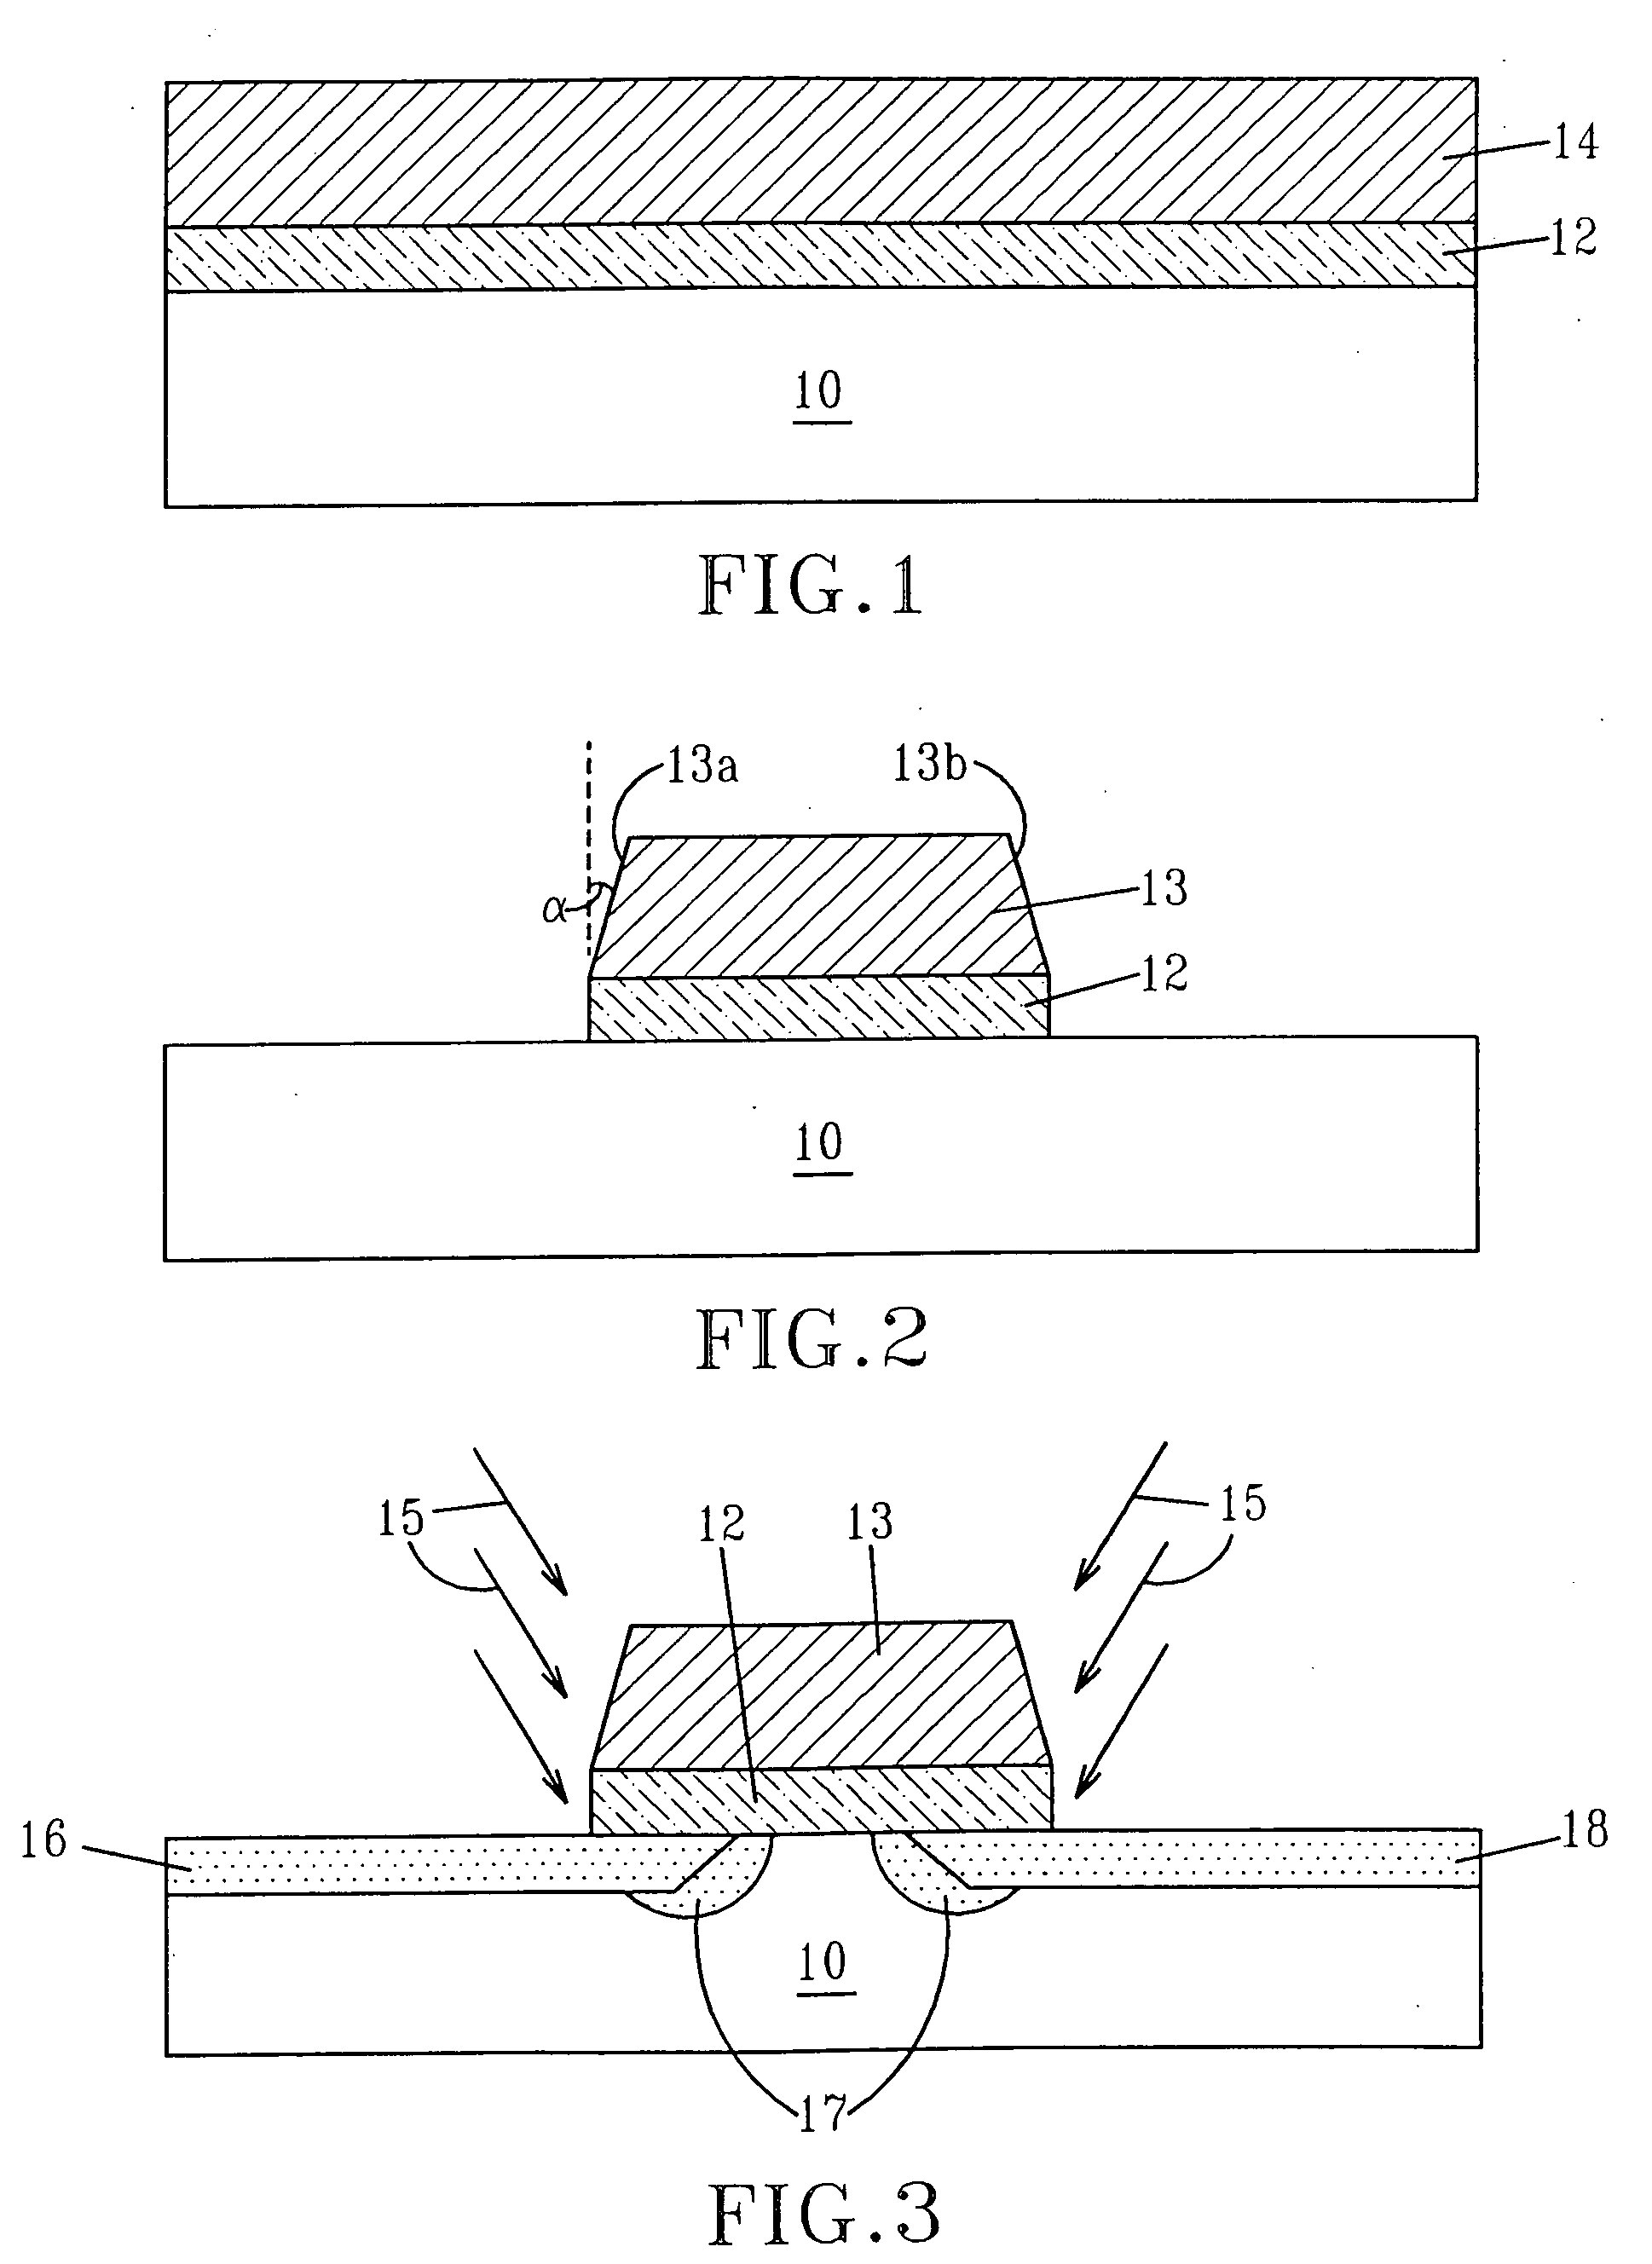 Mosfet with high angle sidewall gate and contacts for reduced miller capacitance